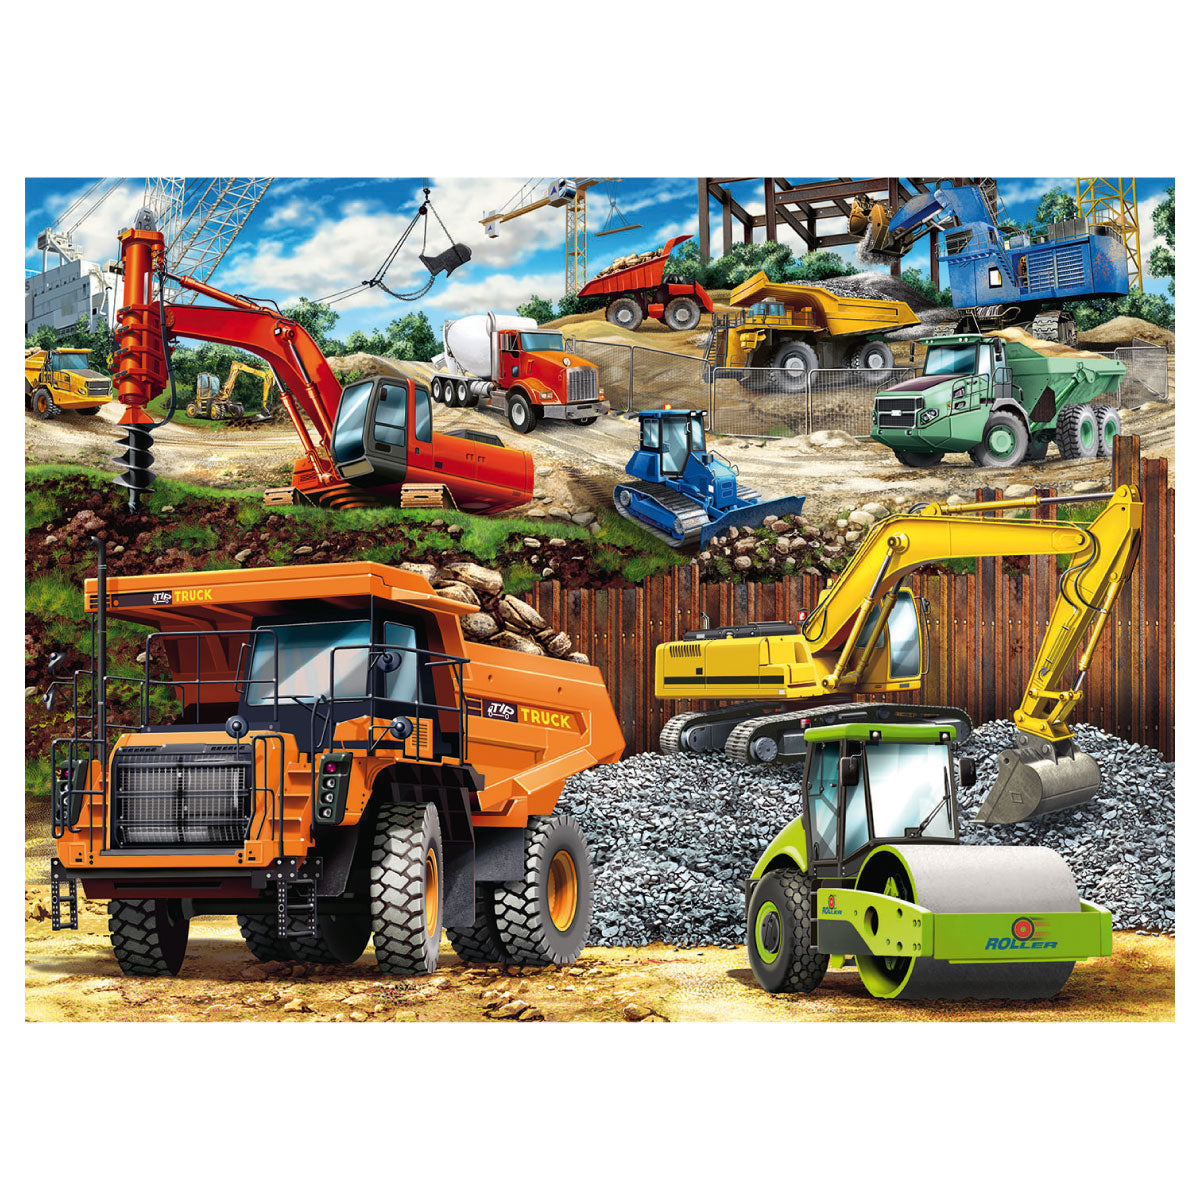 Construction Vehicle 100 pc XXL Jigsaw Puzzle from Ravensburger